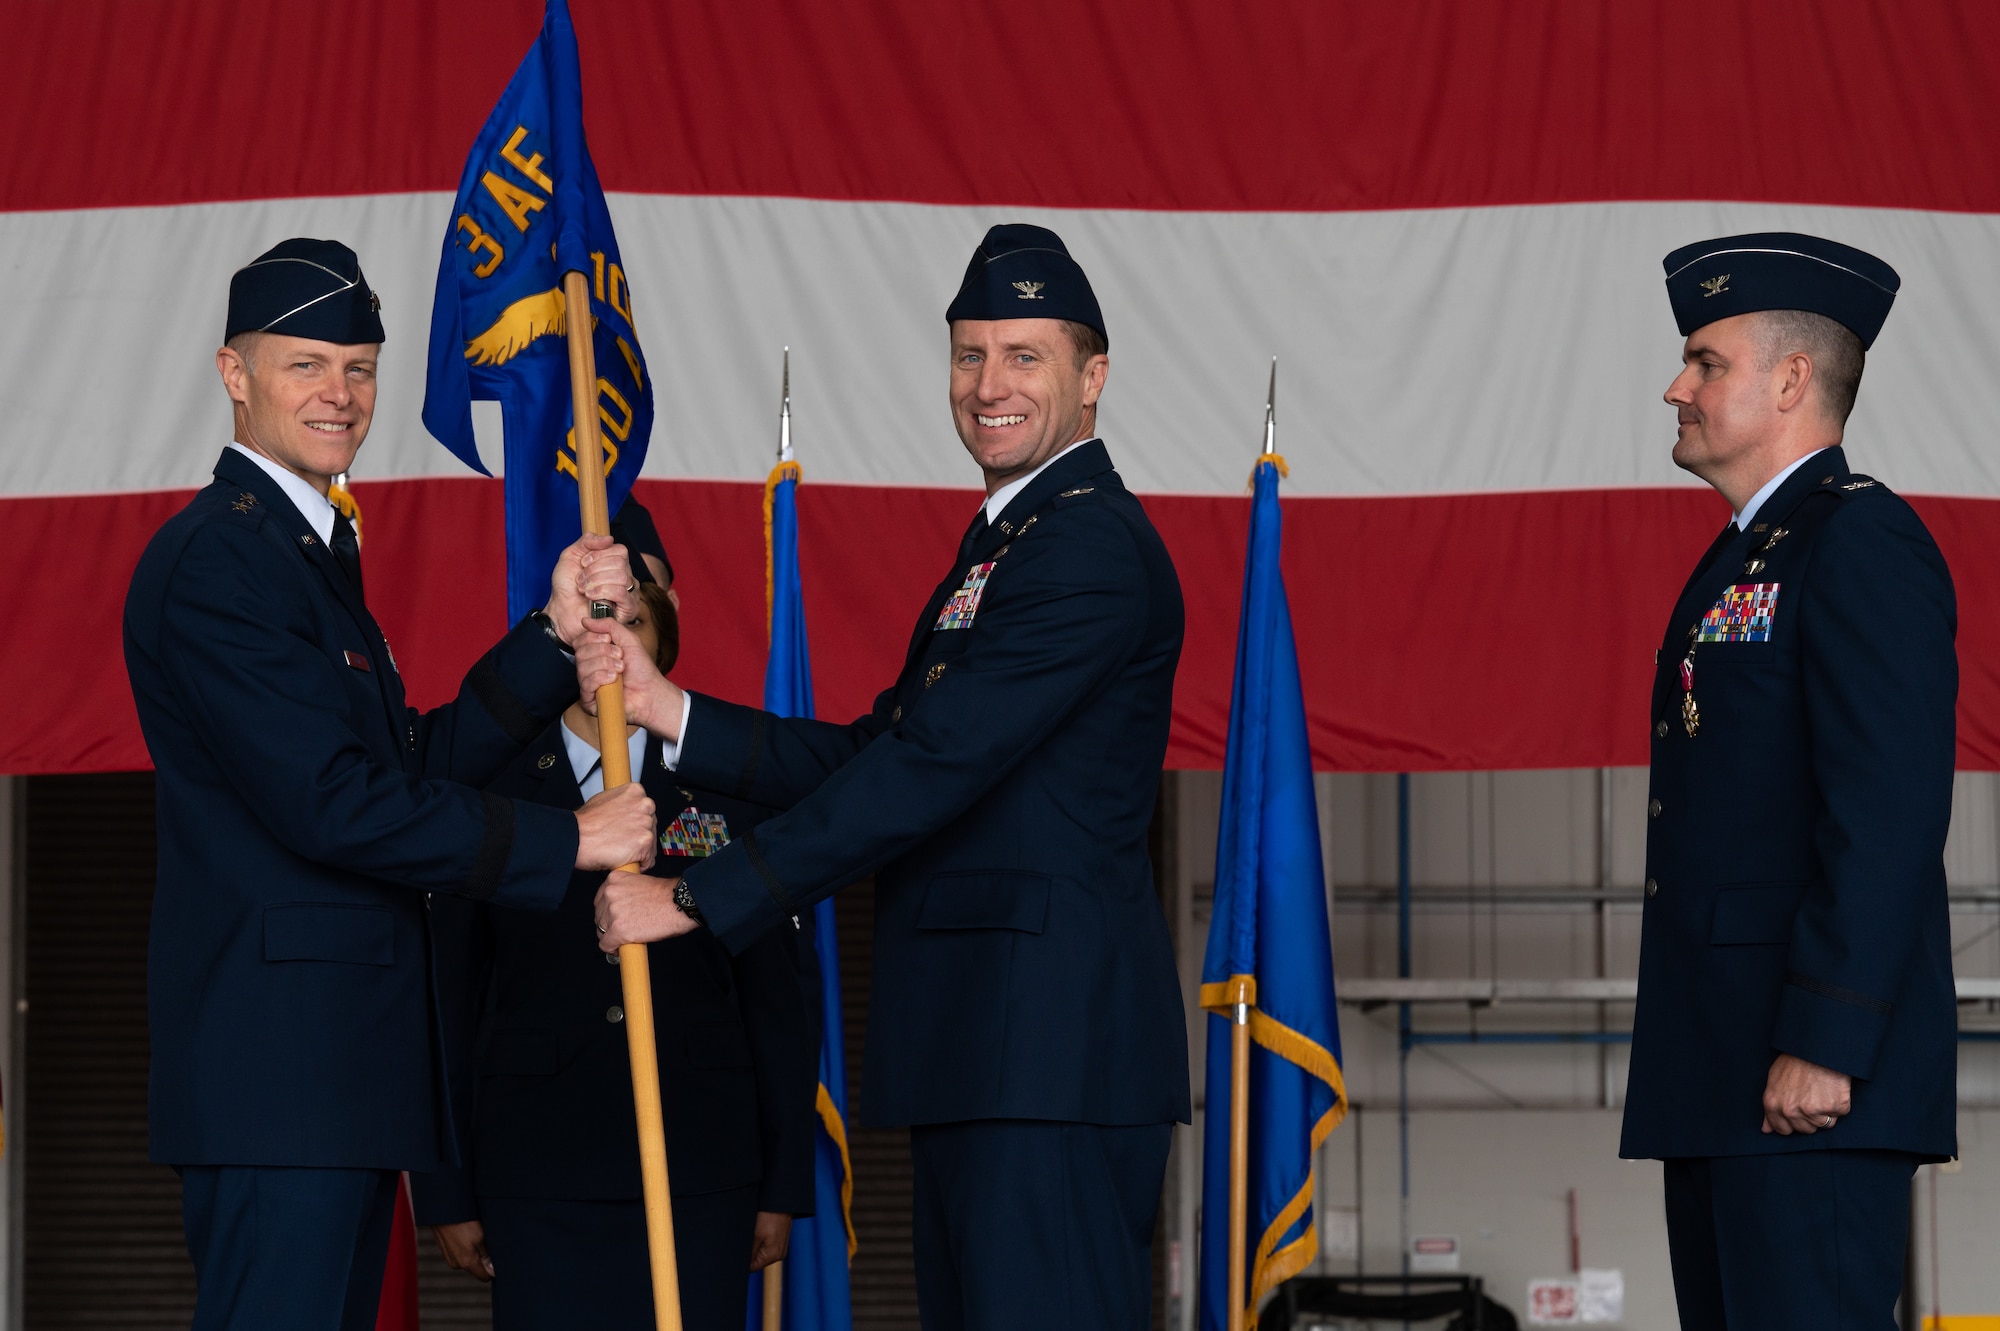 U.S. Air Force Col. Ryan Garlow takes command of the 100th Air Refueling Wing at a change of command ceremony at RAF Mildenhall, England, July 17, 2023.